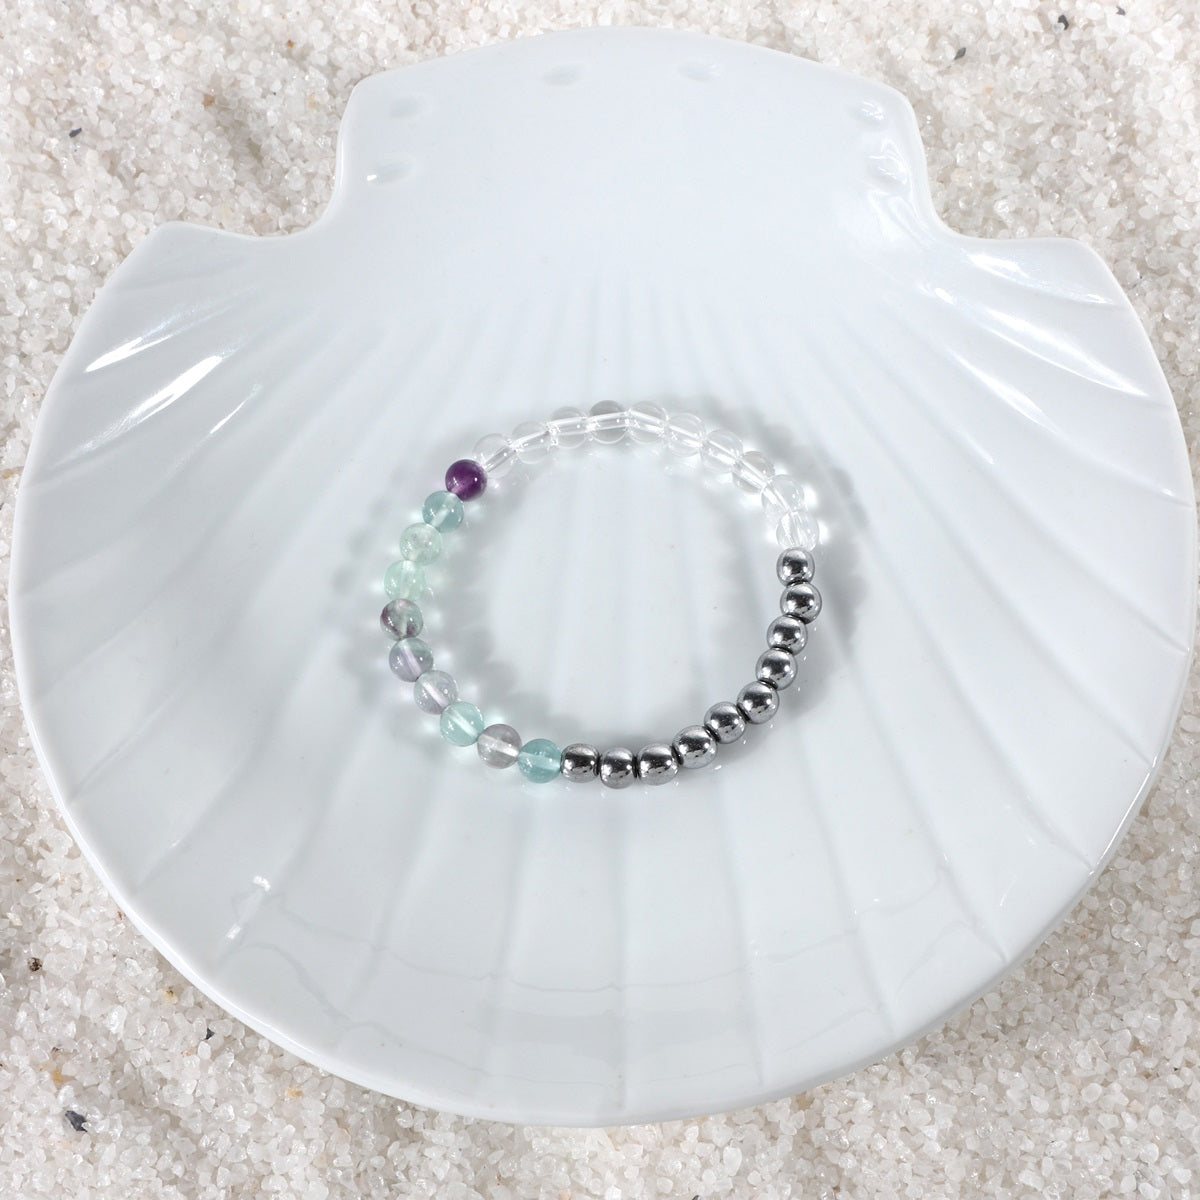 Gemstone arrangement in the Focus and Concentration Bracelet, emphasizing balanced focus and concentration with Clear Quartz, Fluorite, and Hematite